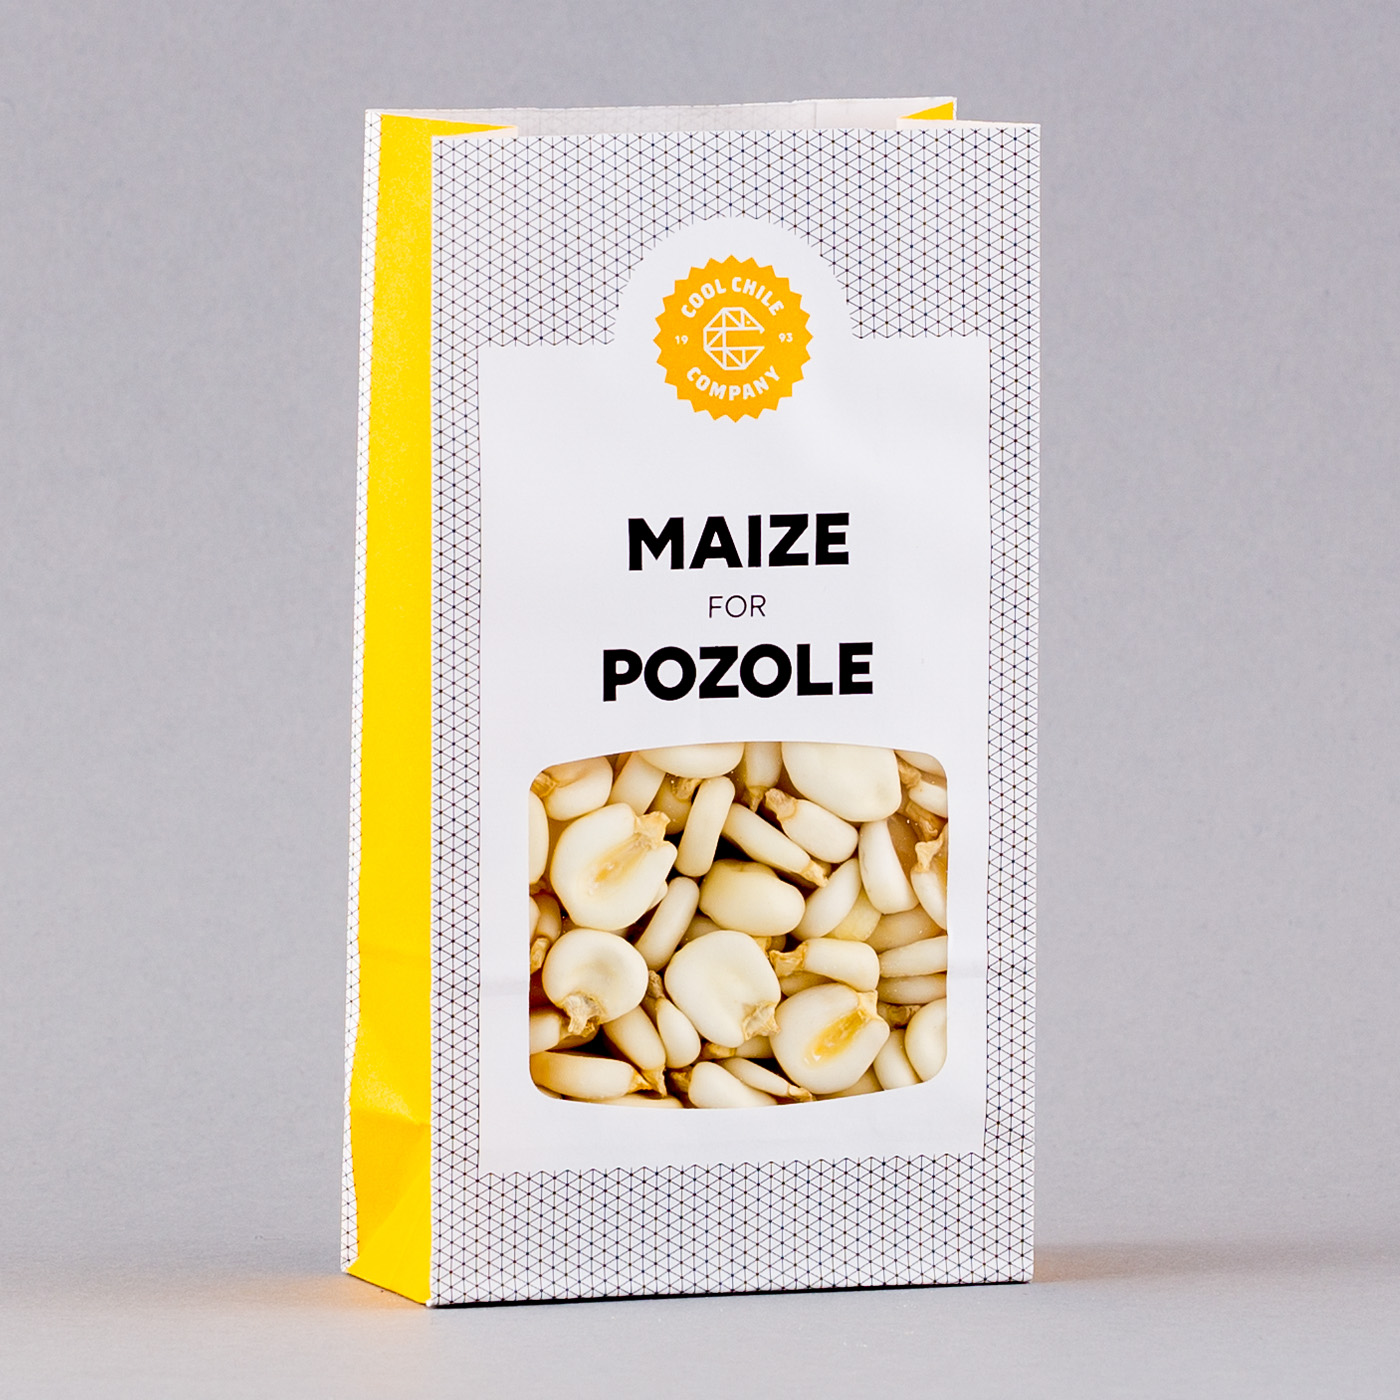 Maize for pozole - product image